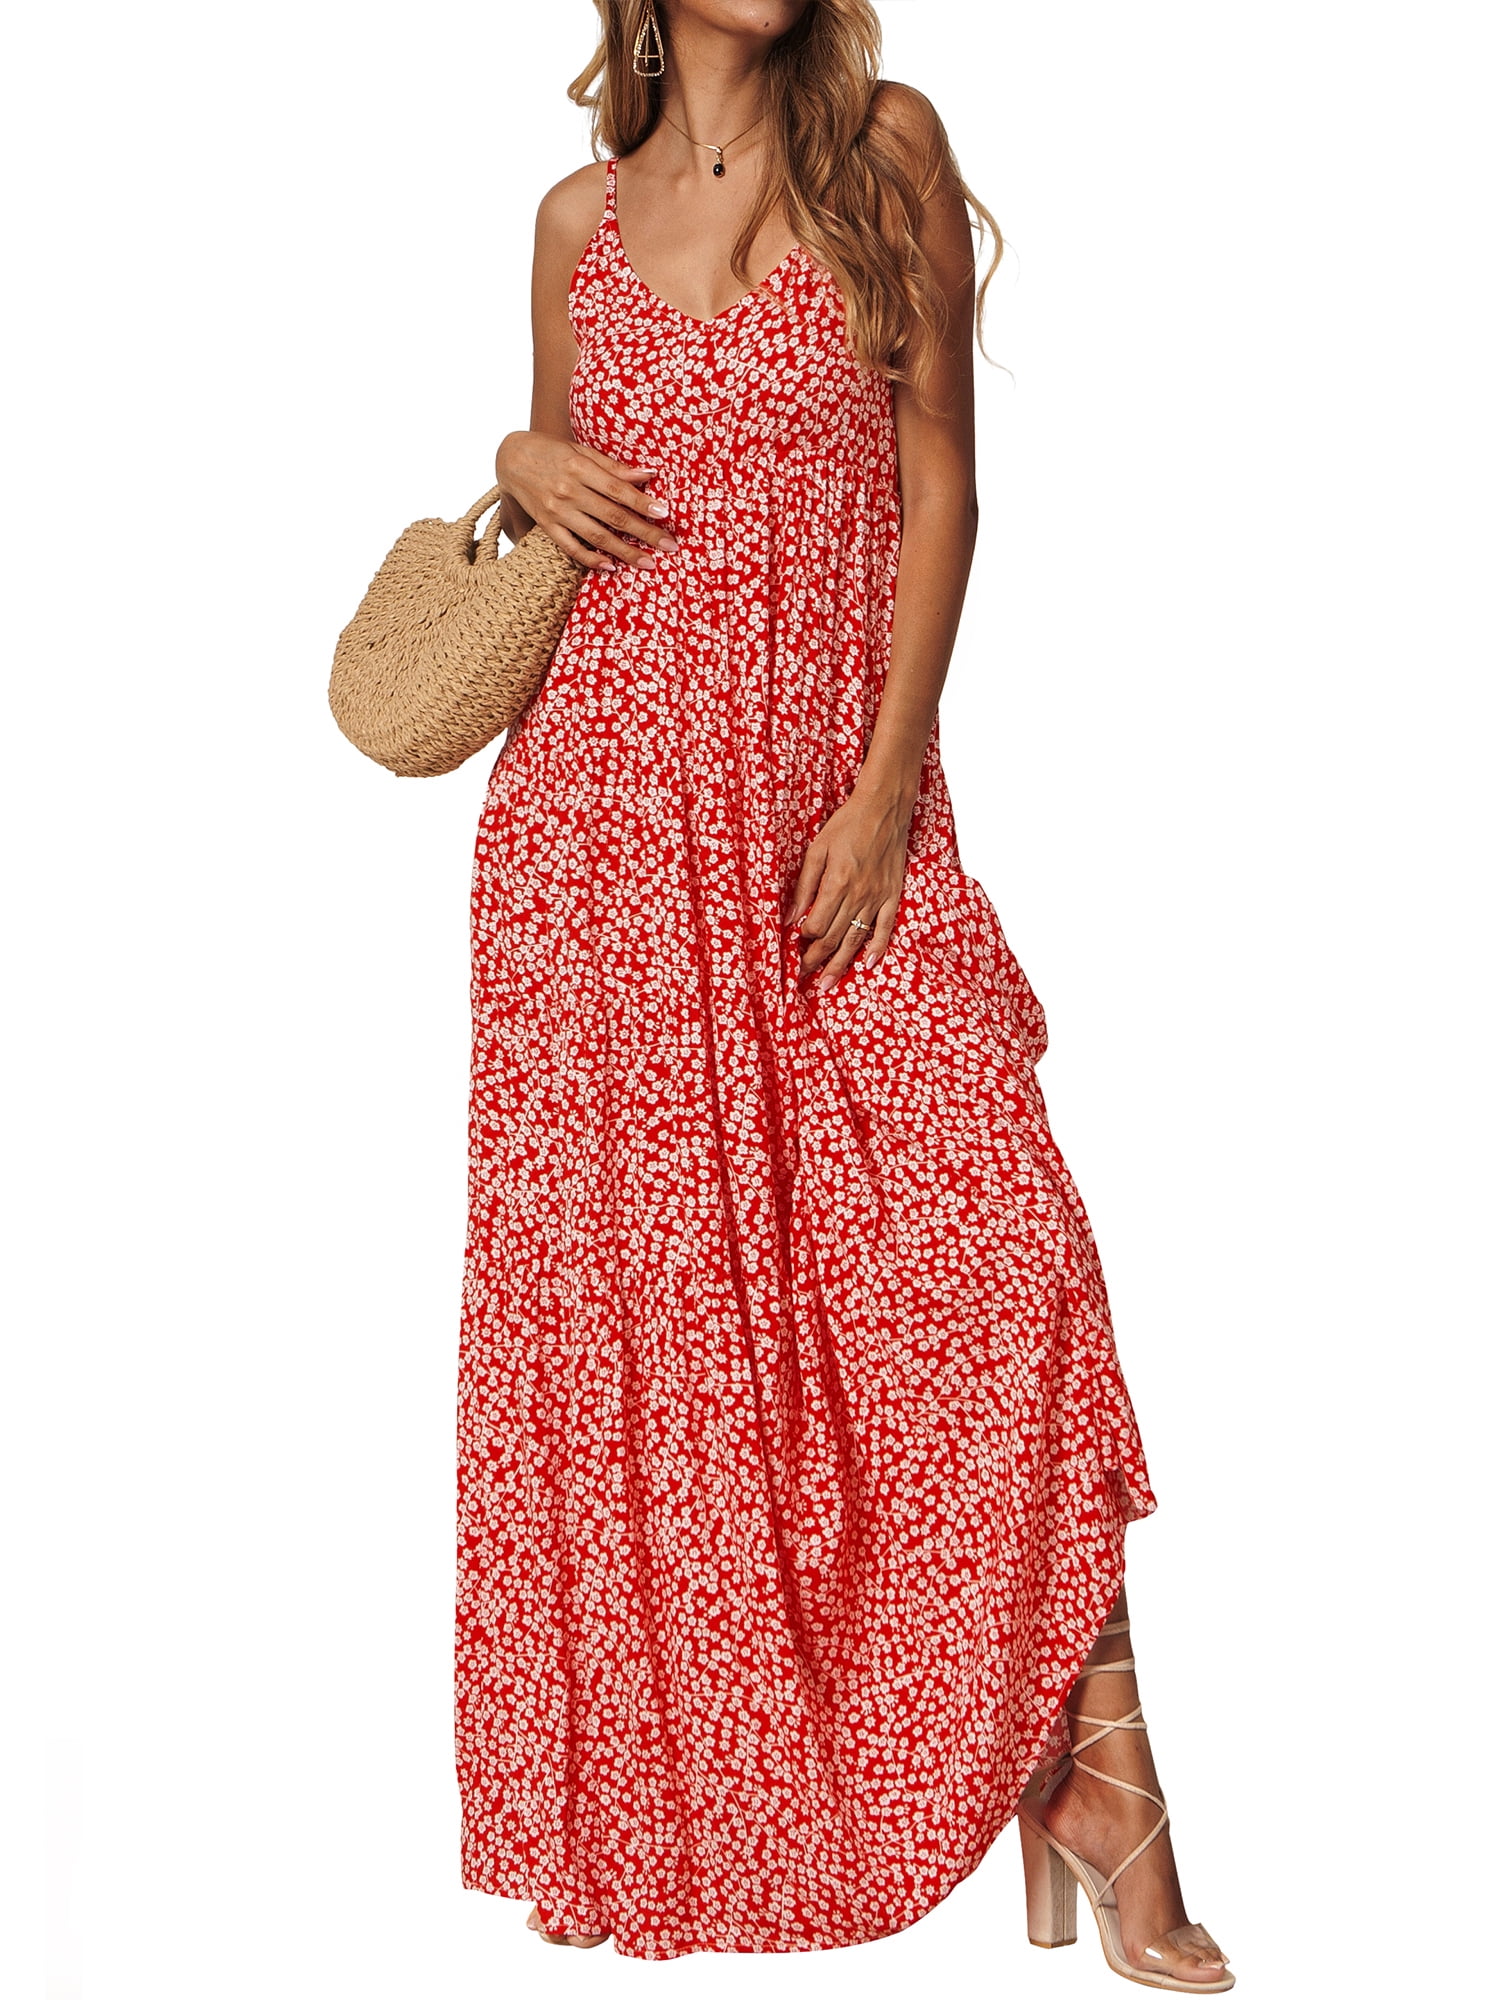 Sexy Dance Beach Floral Print Long Maxi Dresses For